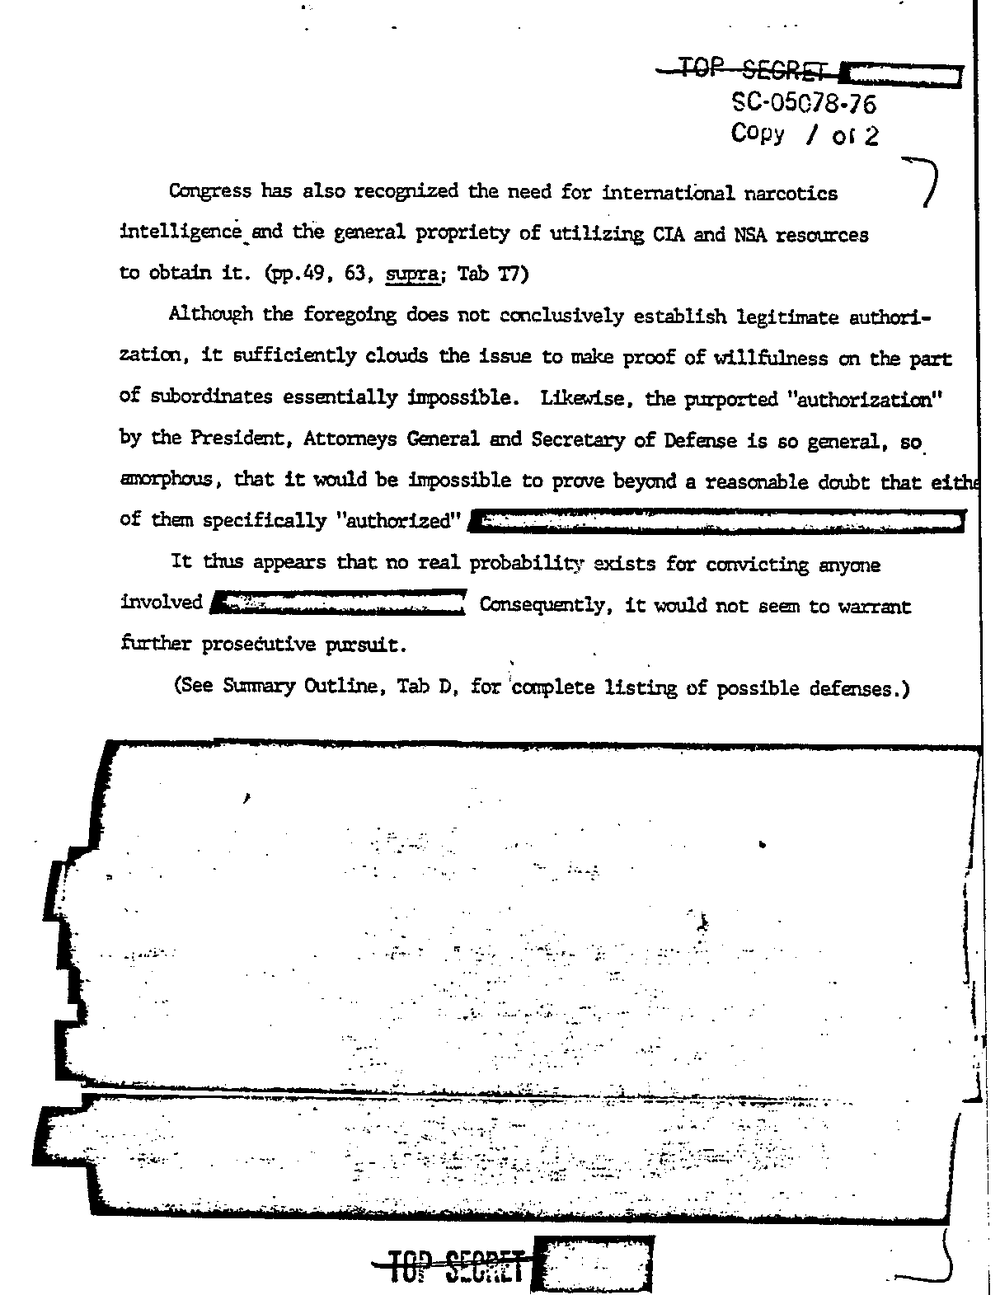 Page 165 from Report on Inquiry Into CIA Related Electronic Surveillance Activities